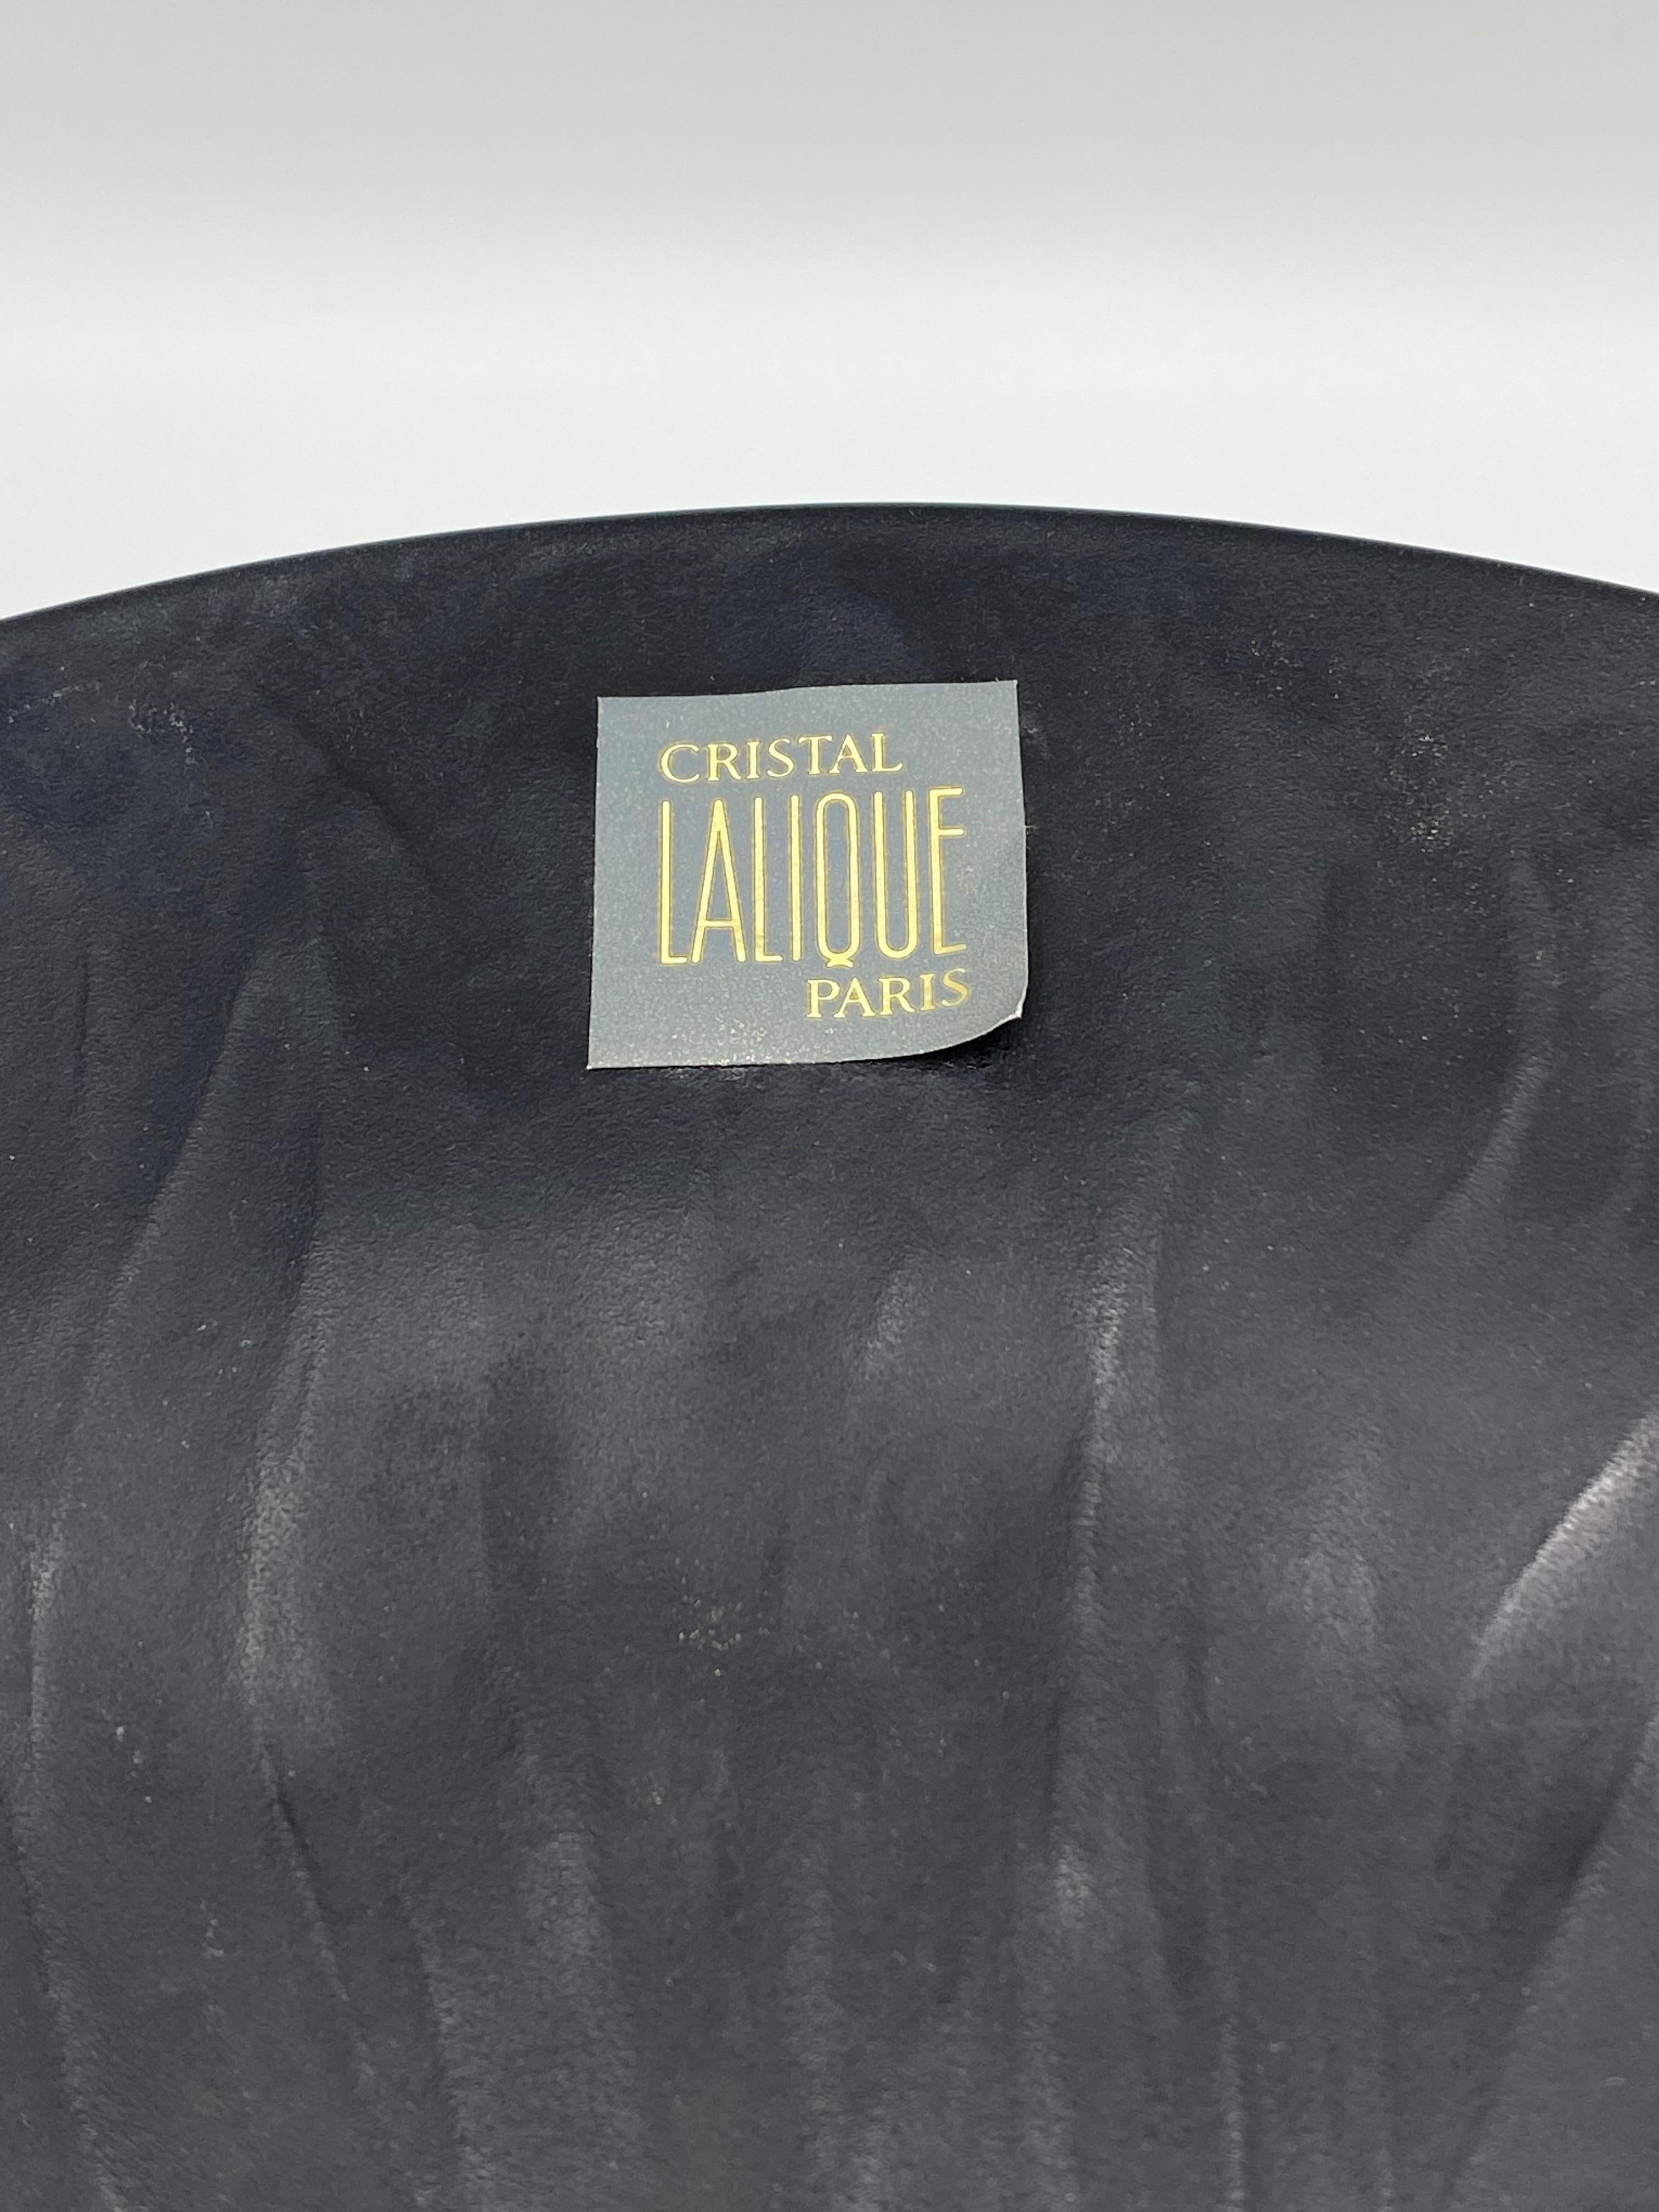 Product details:

The plates feature black crystal with matte and tree of life textured finish. It could be decorative or used as dinner plates. Each plate is signed Lalique France on the back. The plates can be sold separately upon request.
The